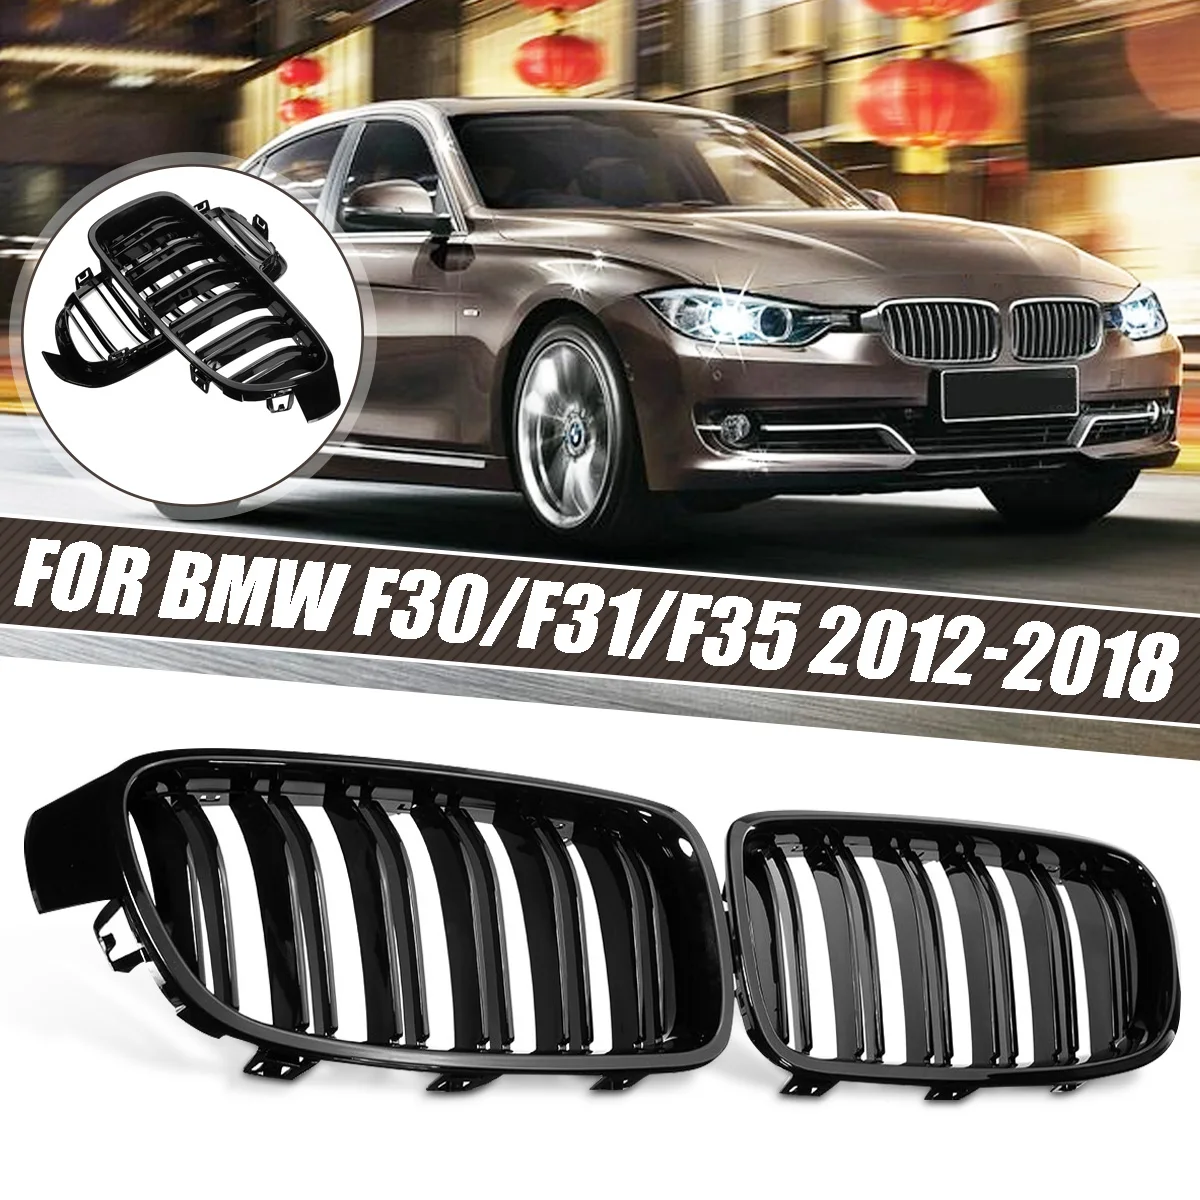 

Racing Grills Car Front Grilled Grill Carbon Black For BMW 3 Series F30 F31 318i 320i 328i 2012 2013 2014 2015 2016 2017 2018